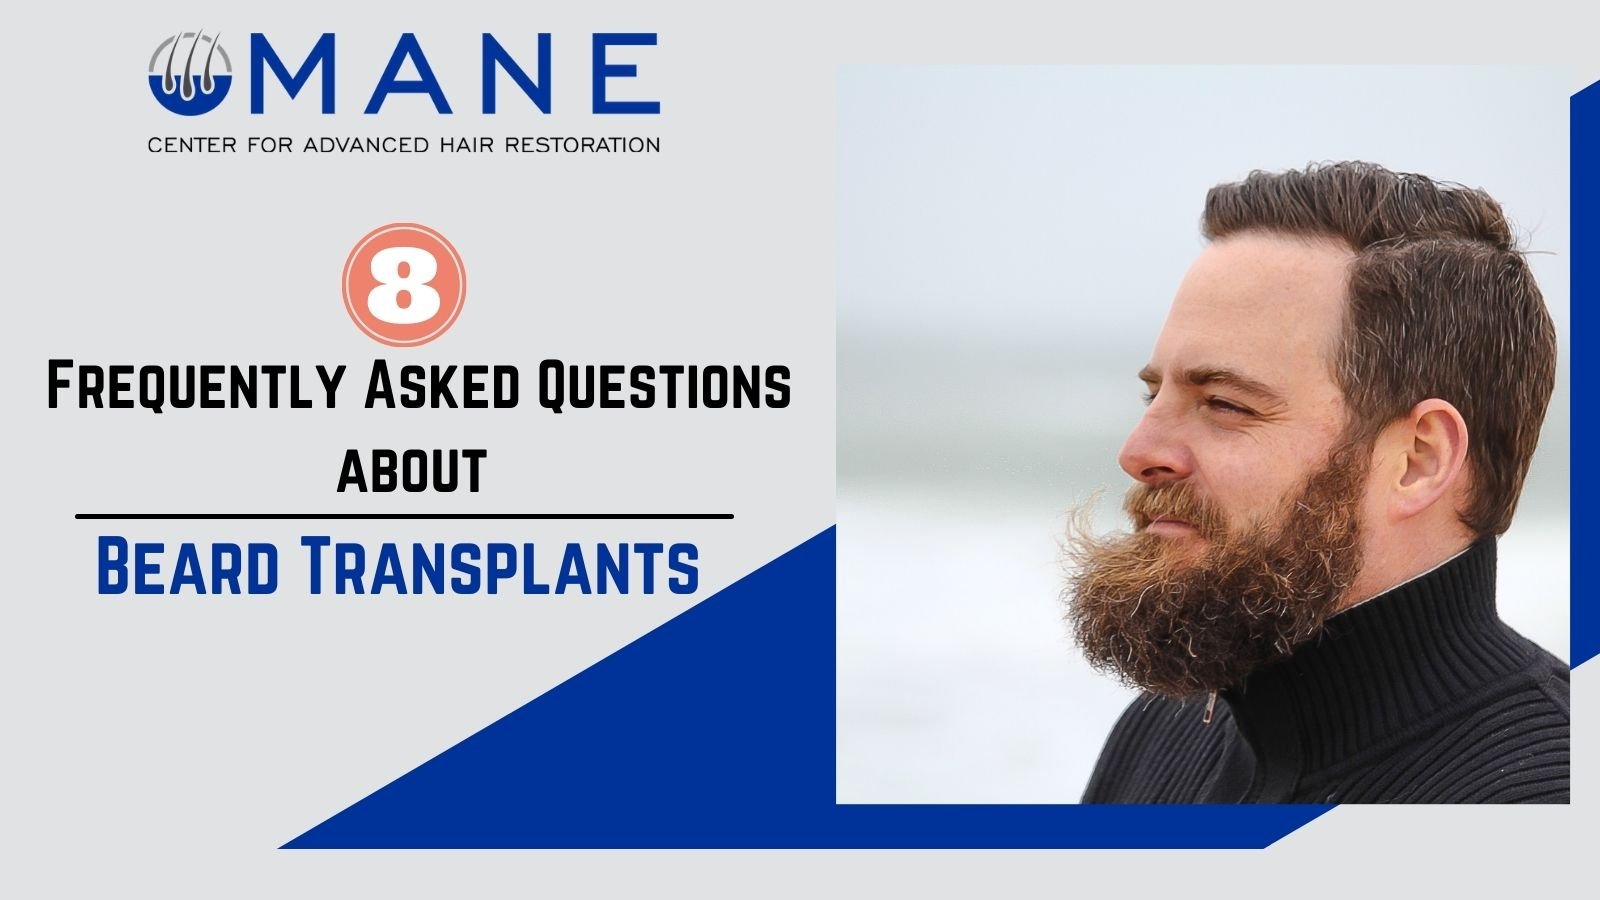 8 Frequently Asked Questions about Beard Transplants